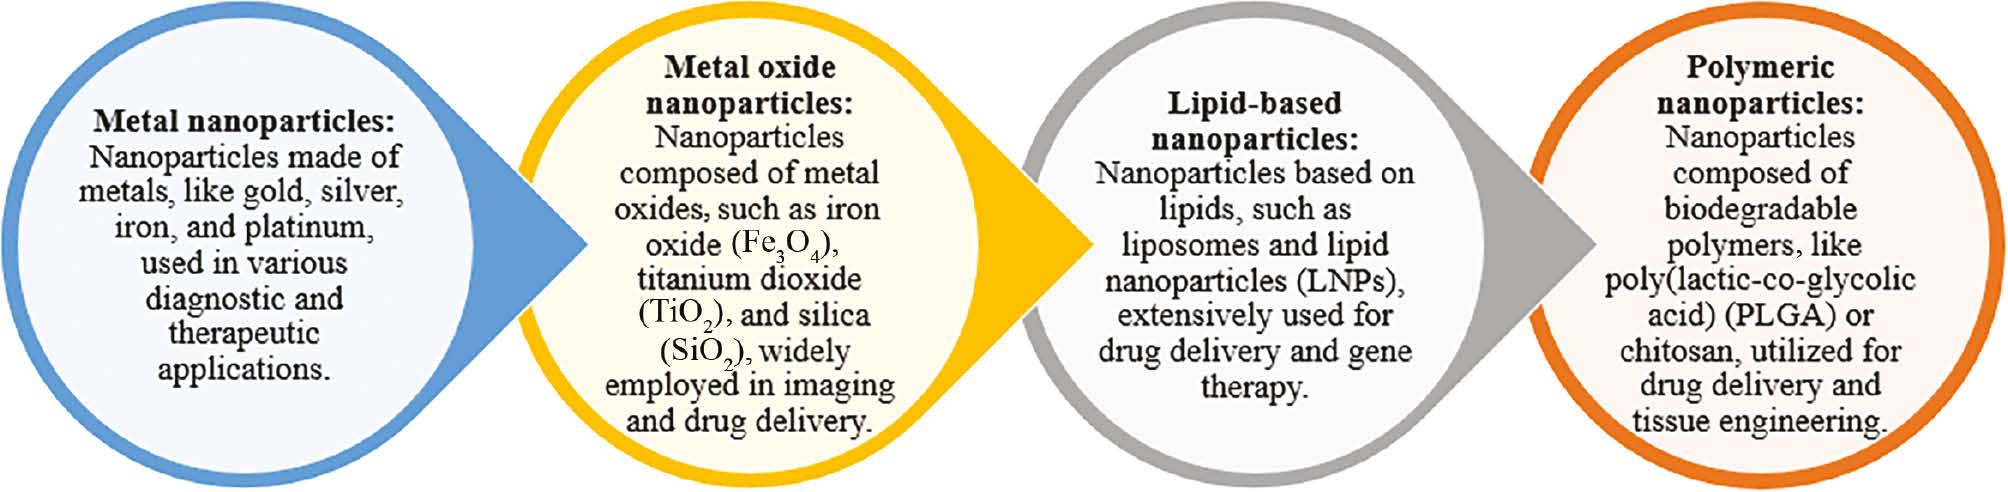 Typical categorizations of nanoparticles utilized in medicinal applications.